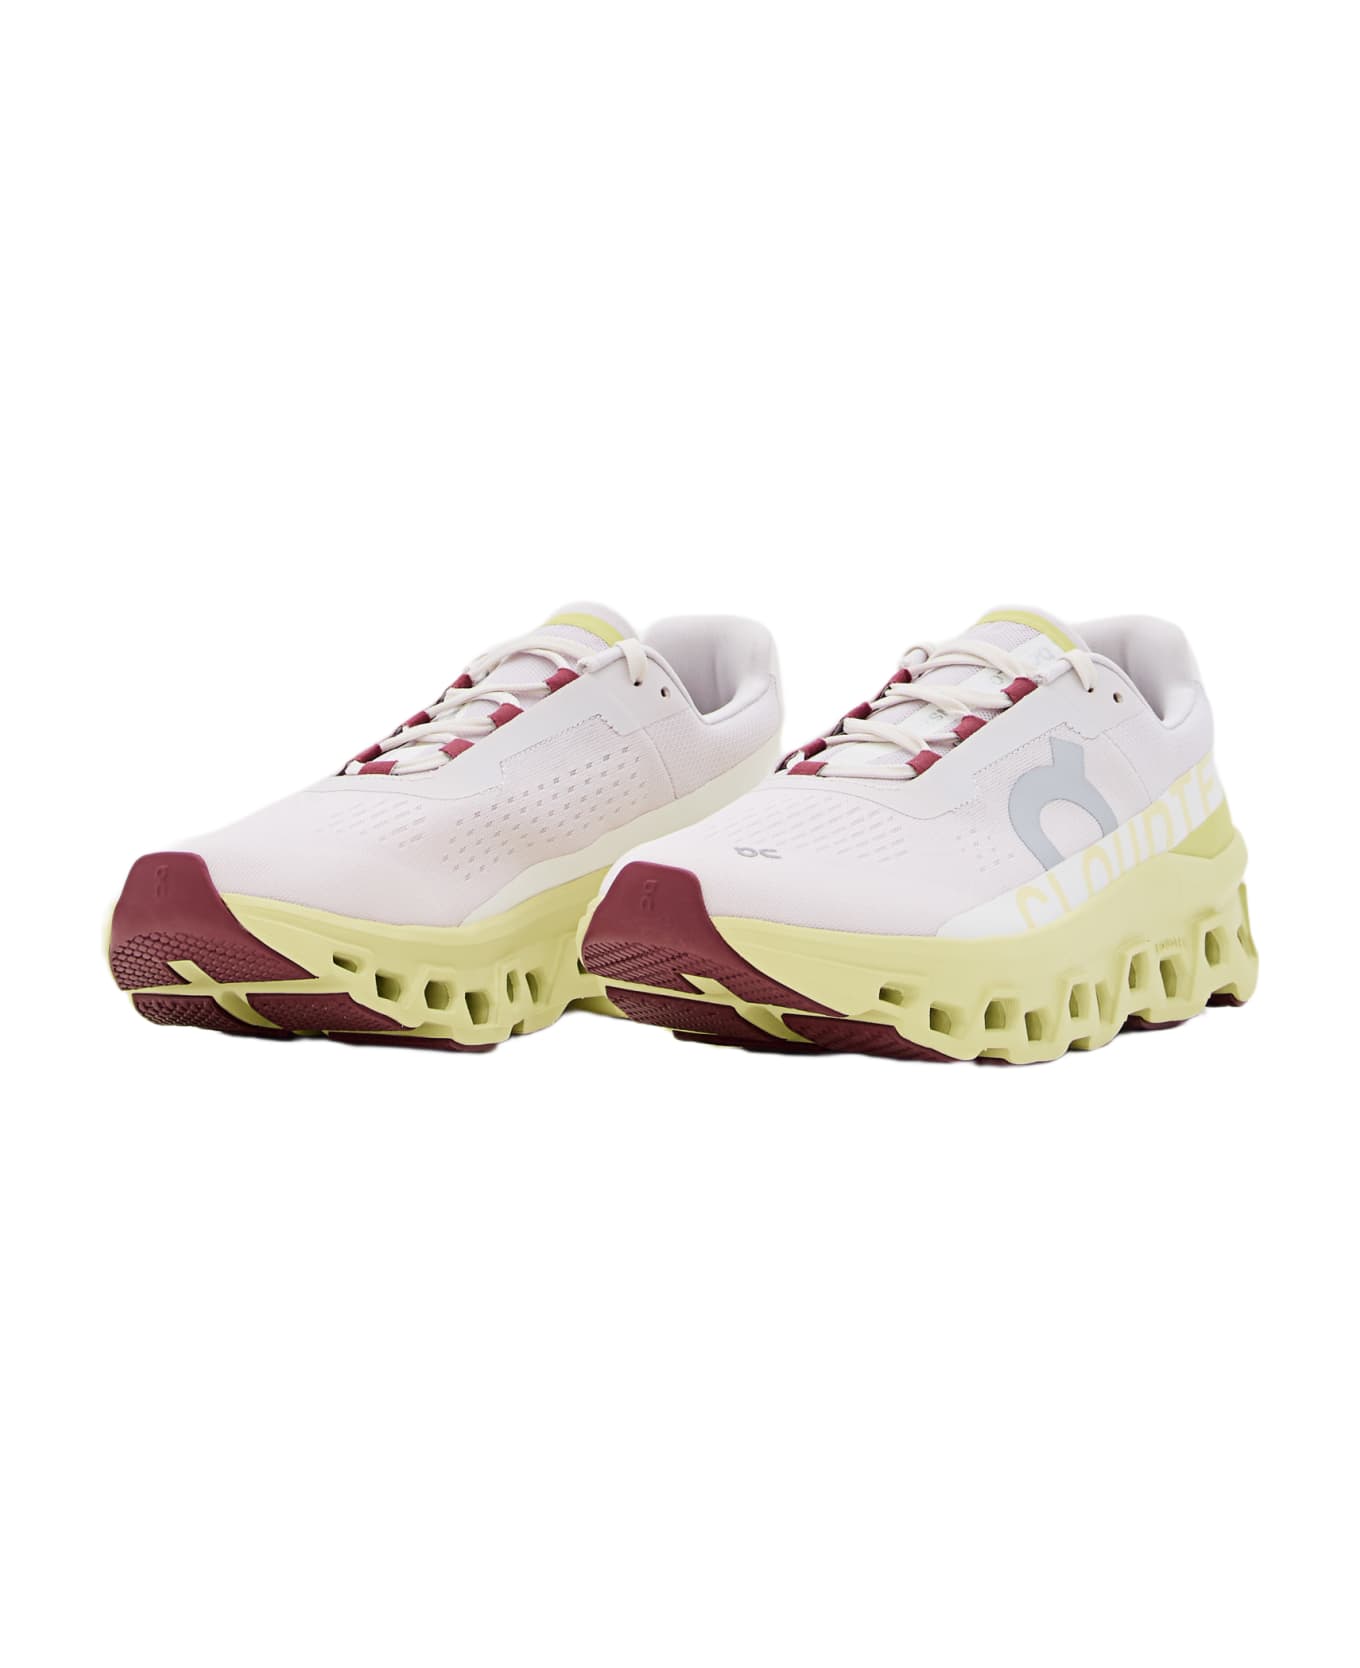 ON Cloudmonster Sneakers - White